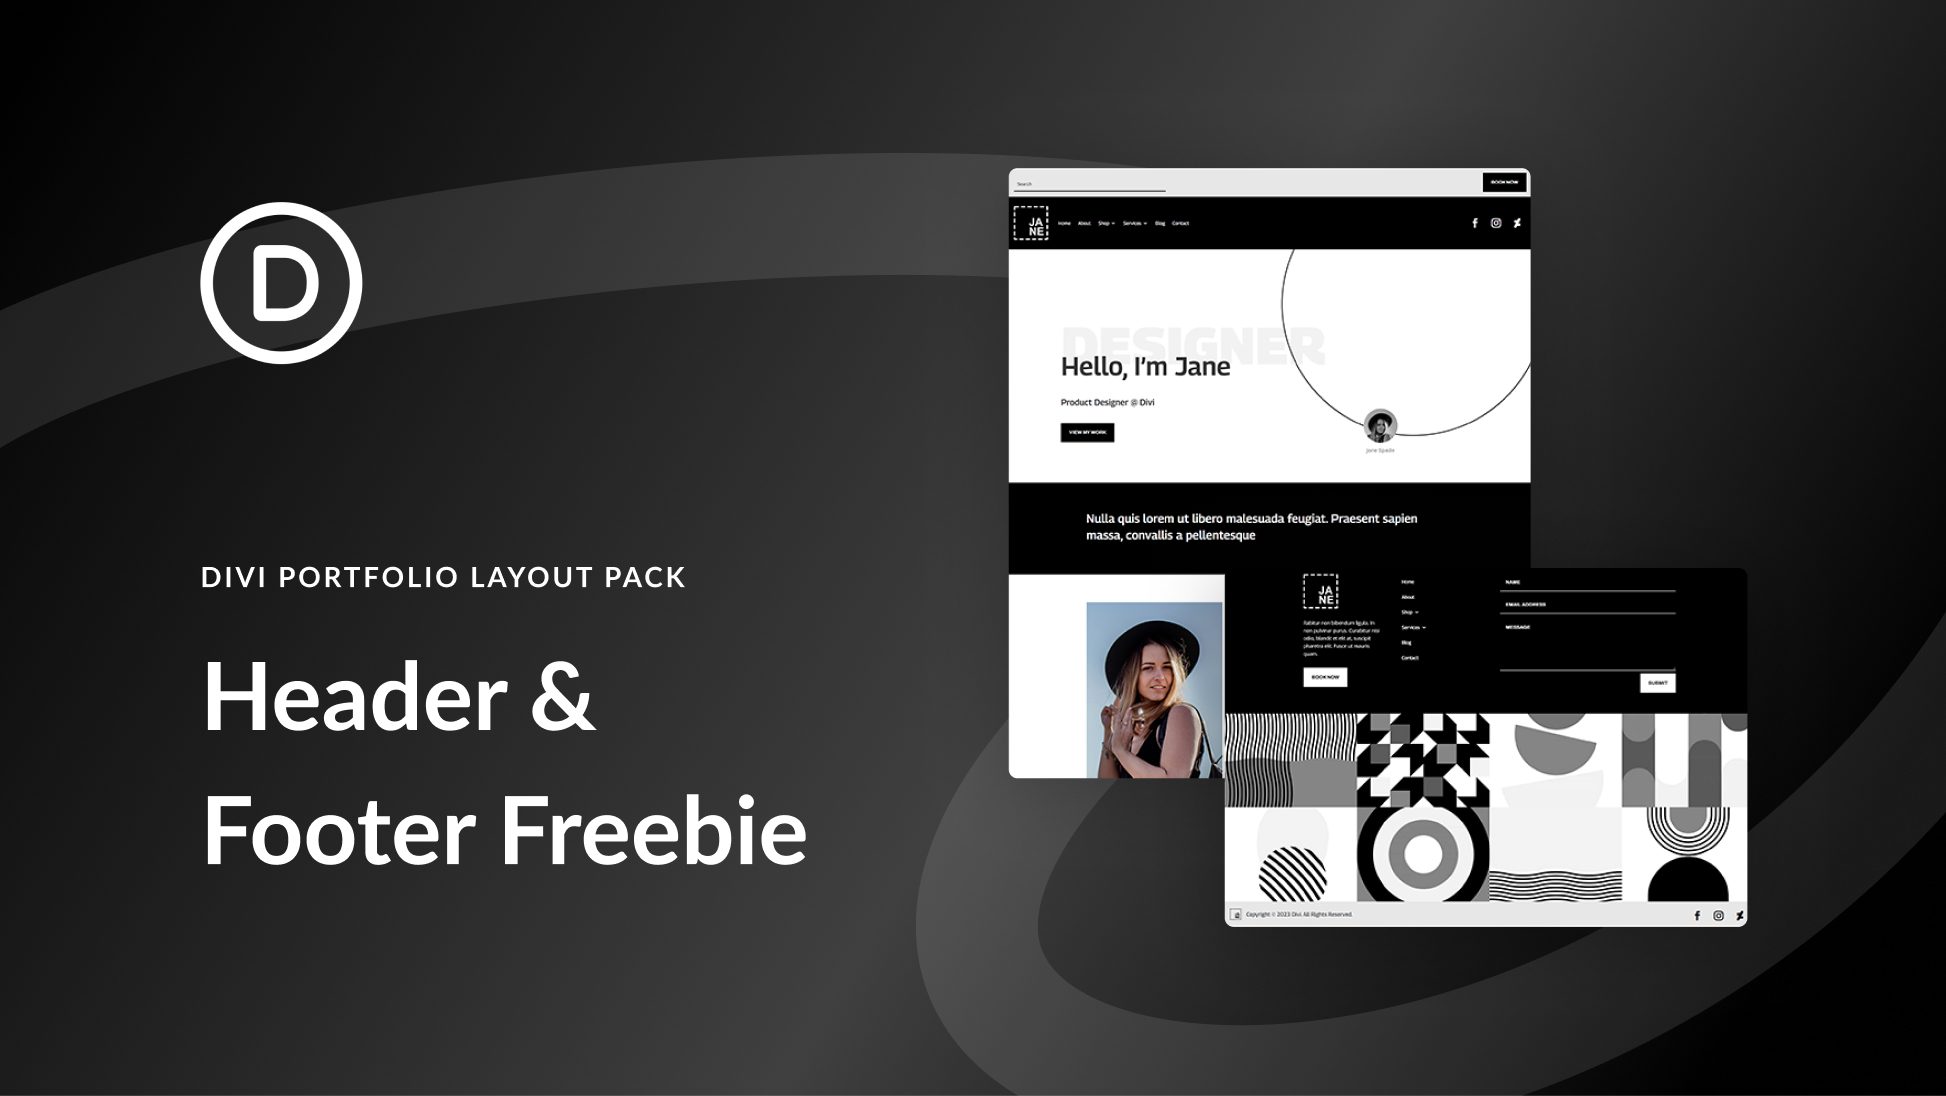 Download a FREE Header & Footer for Divi’s Portfolio Layout Pack